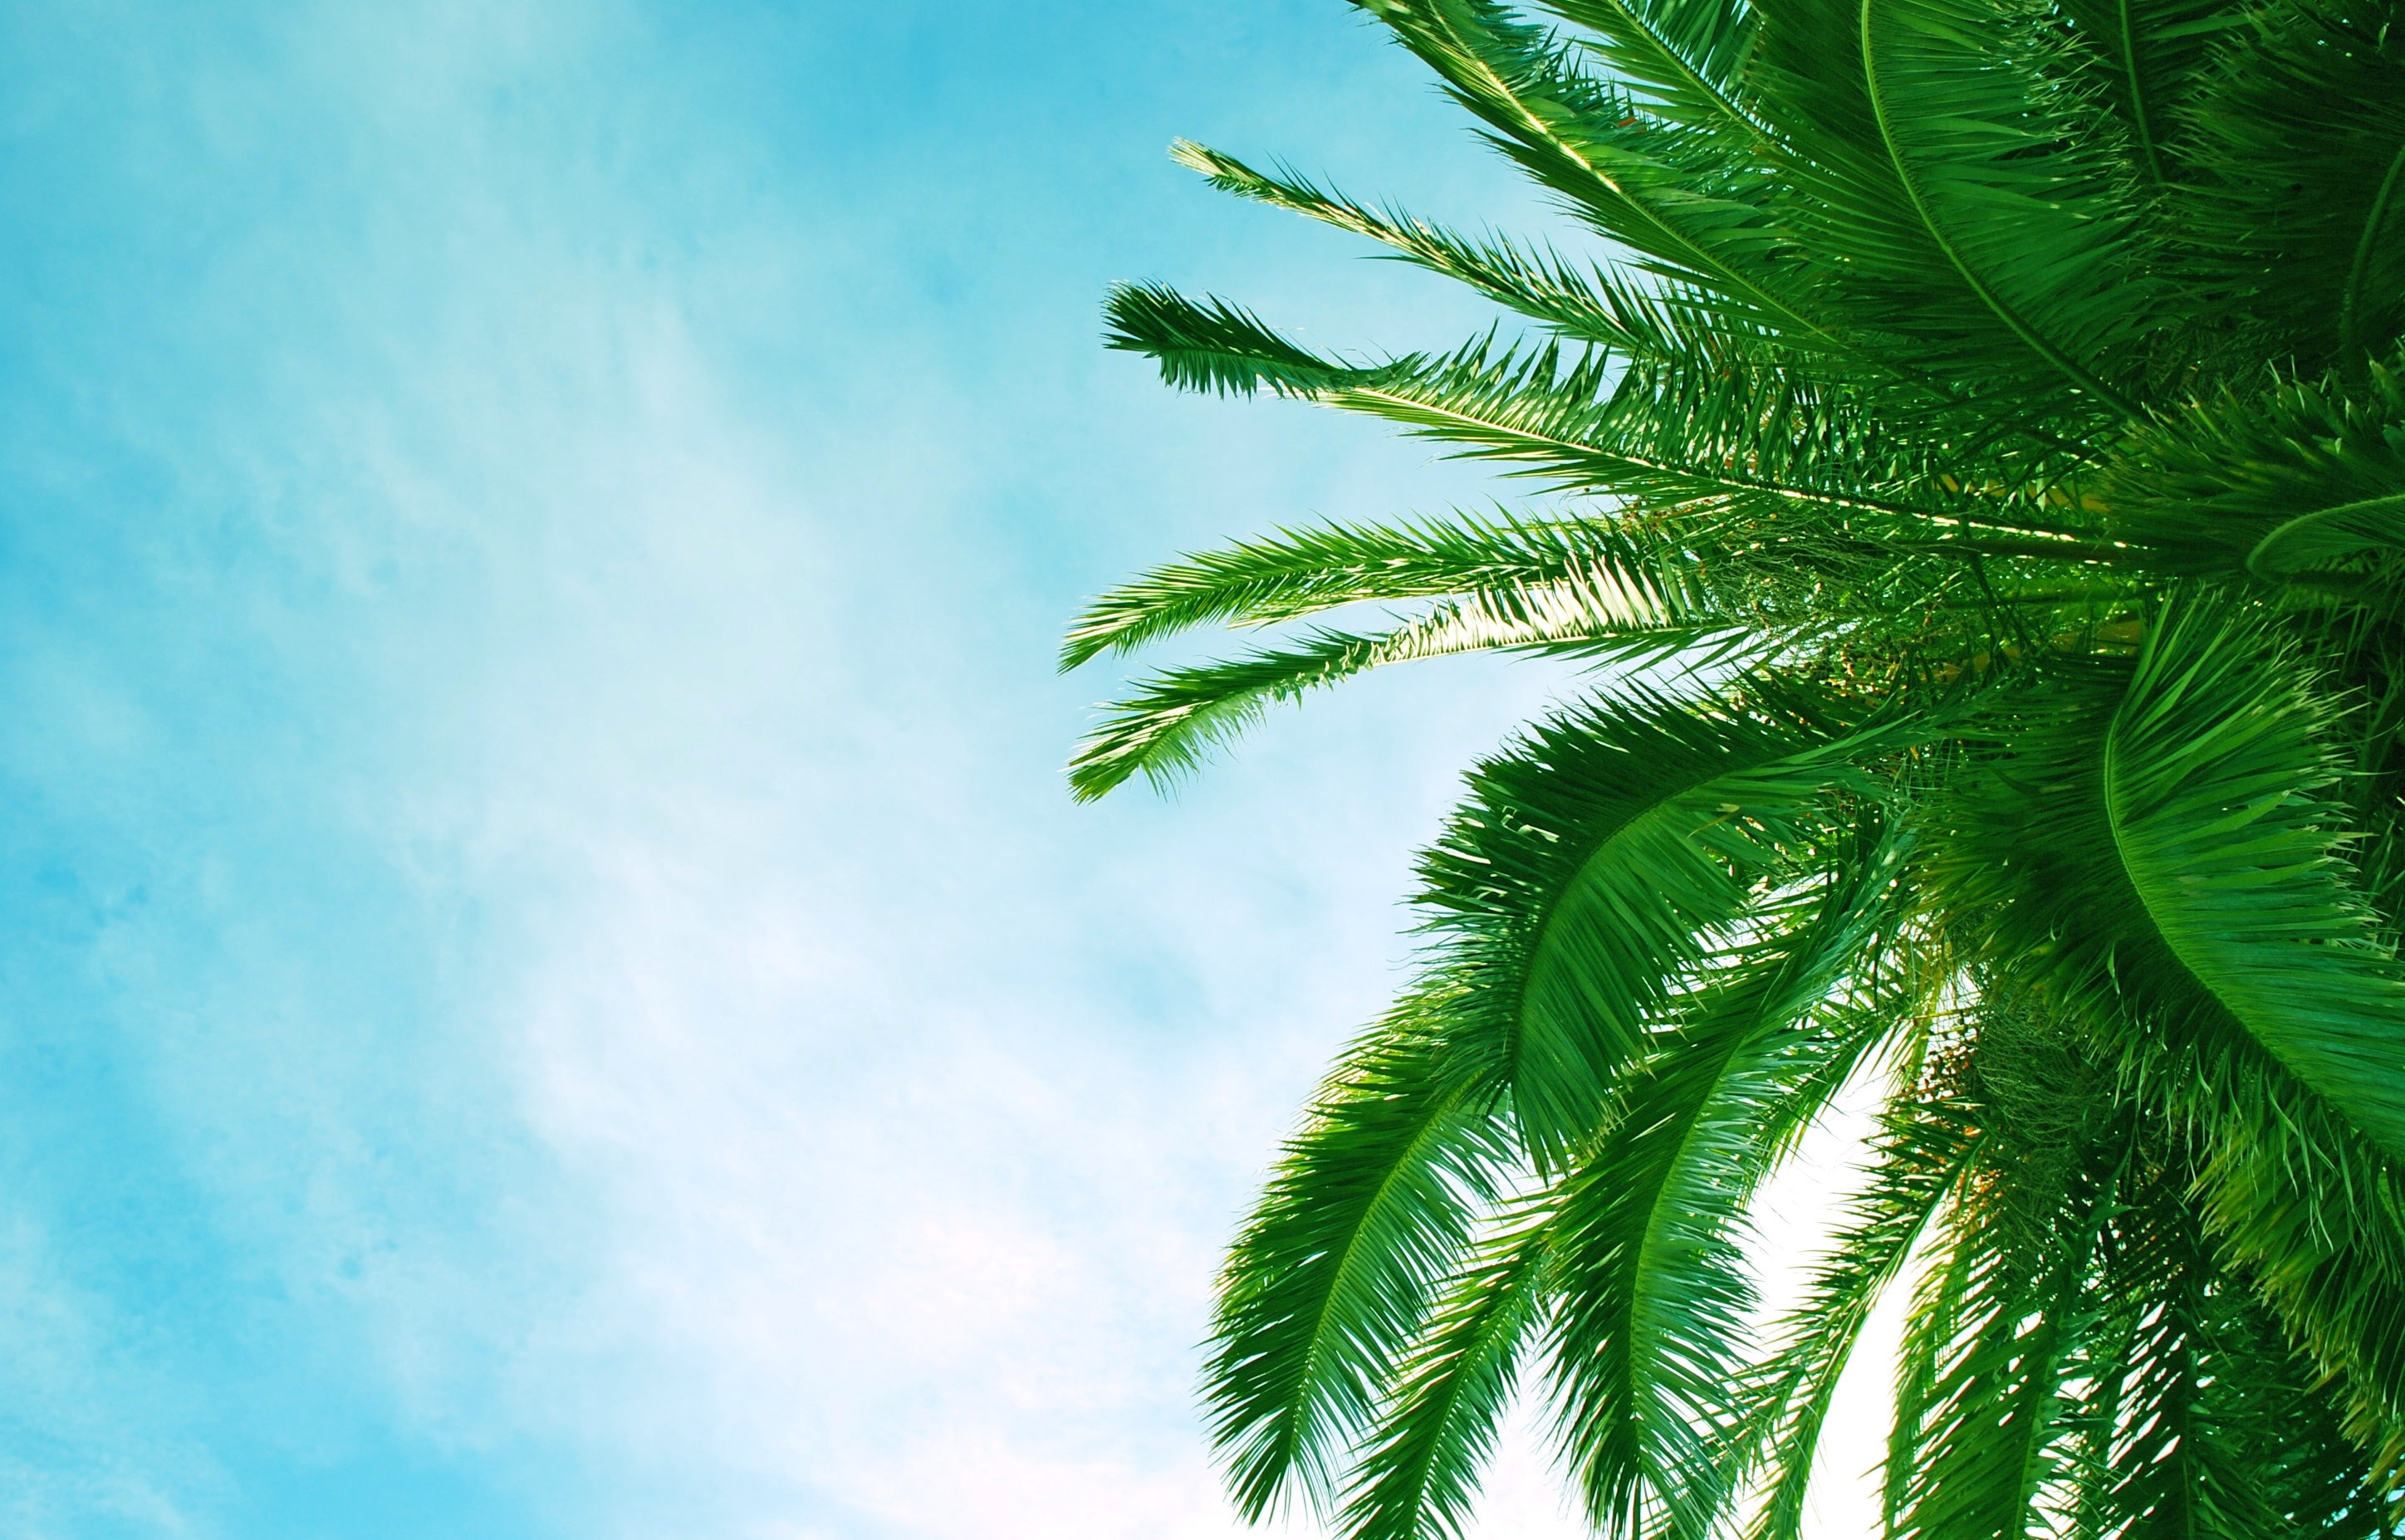 Palm tree, Krone, Branches, Leaves, Clouds, Sky, Azure, Hot